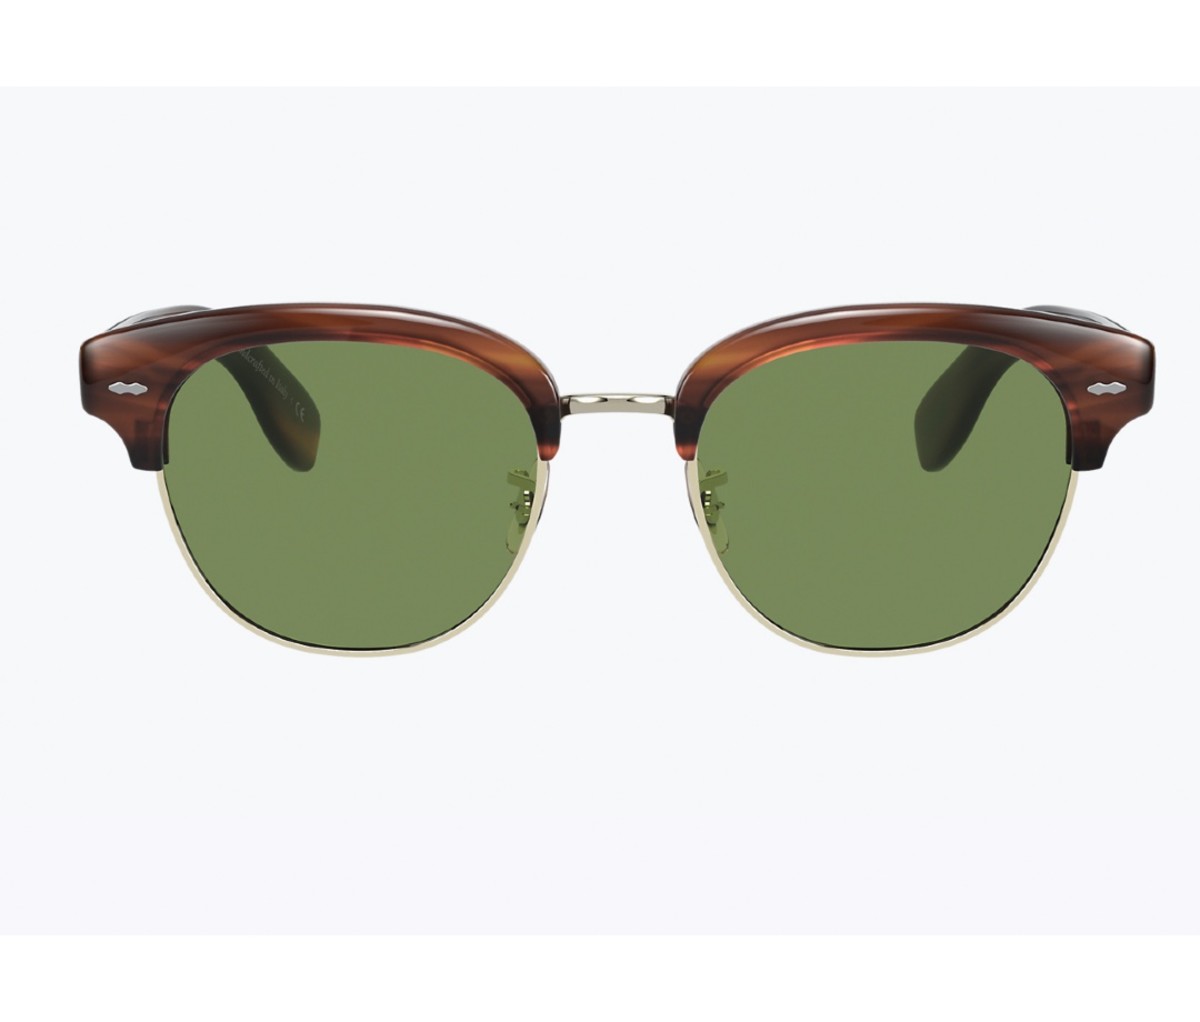 Oliver Peoples Cary Grant 2 Sun